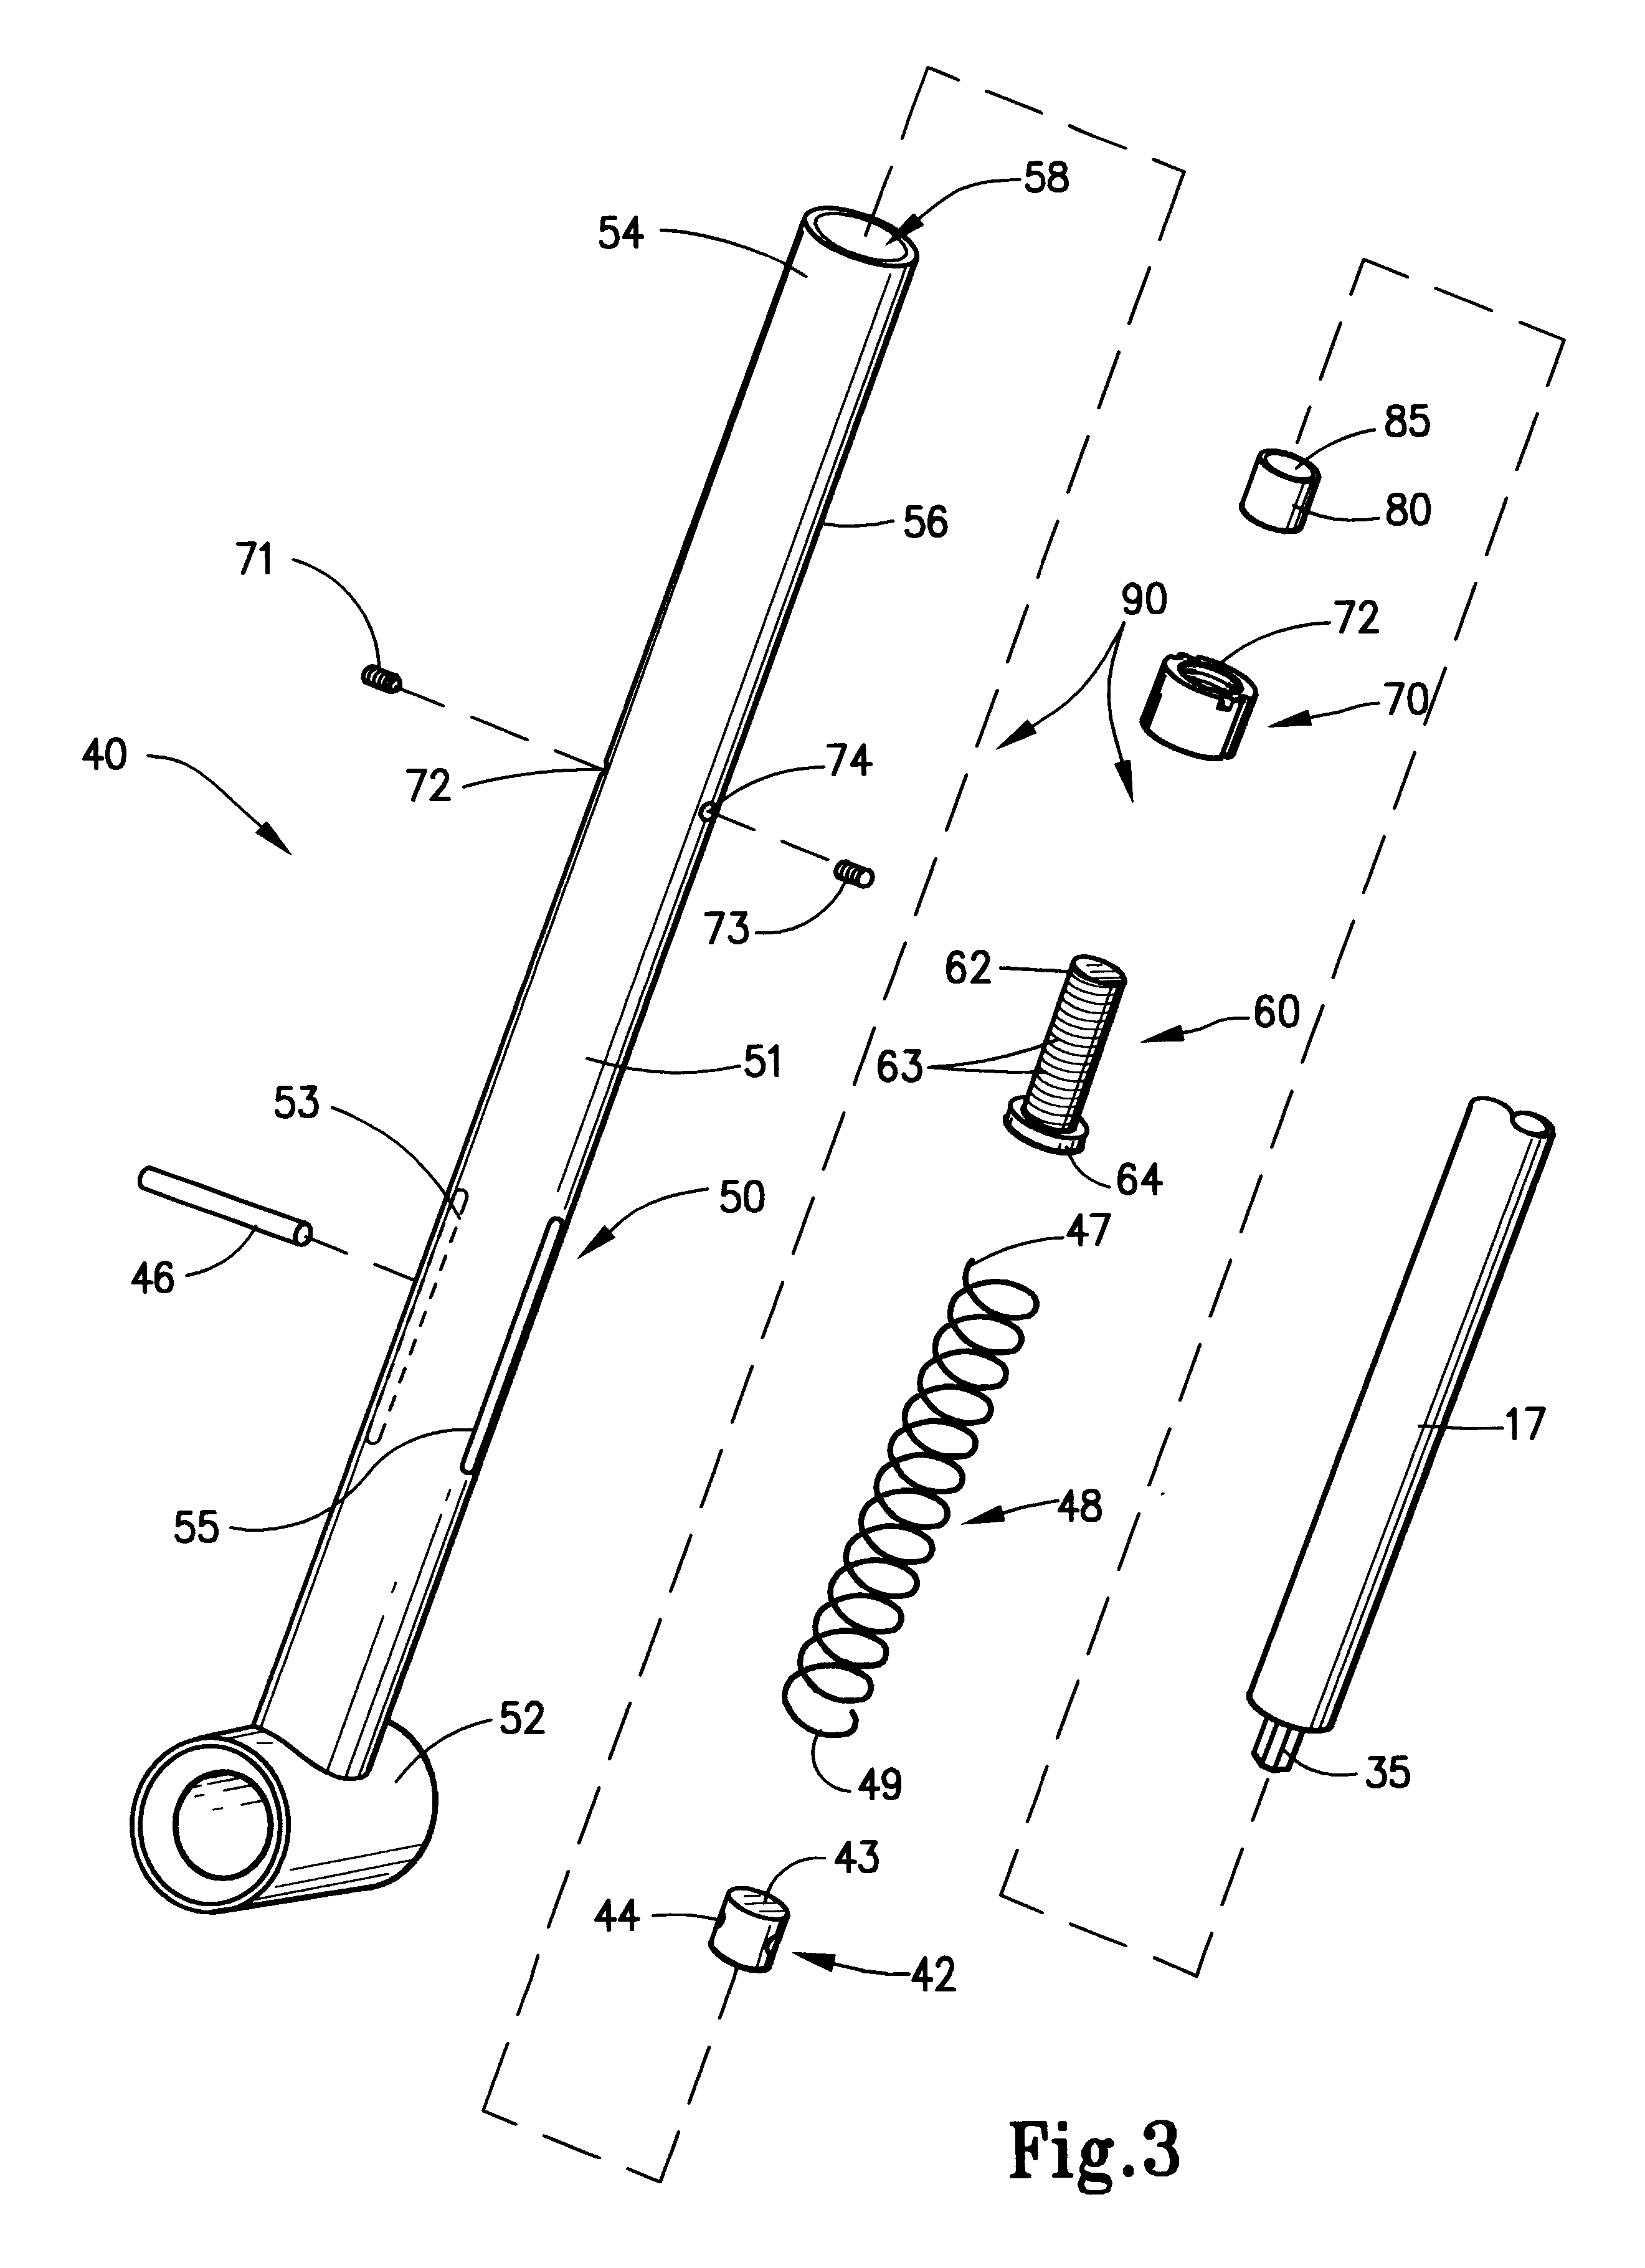 Cycle incorporating shock absorber